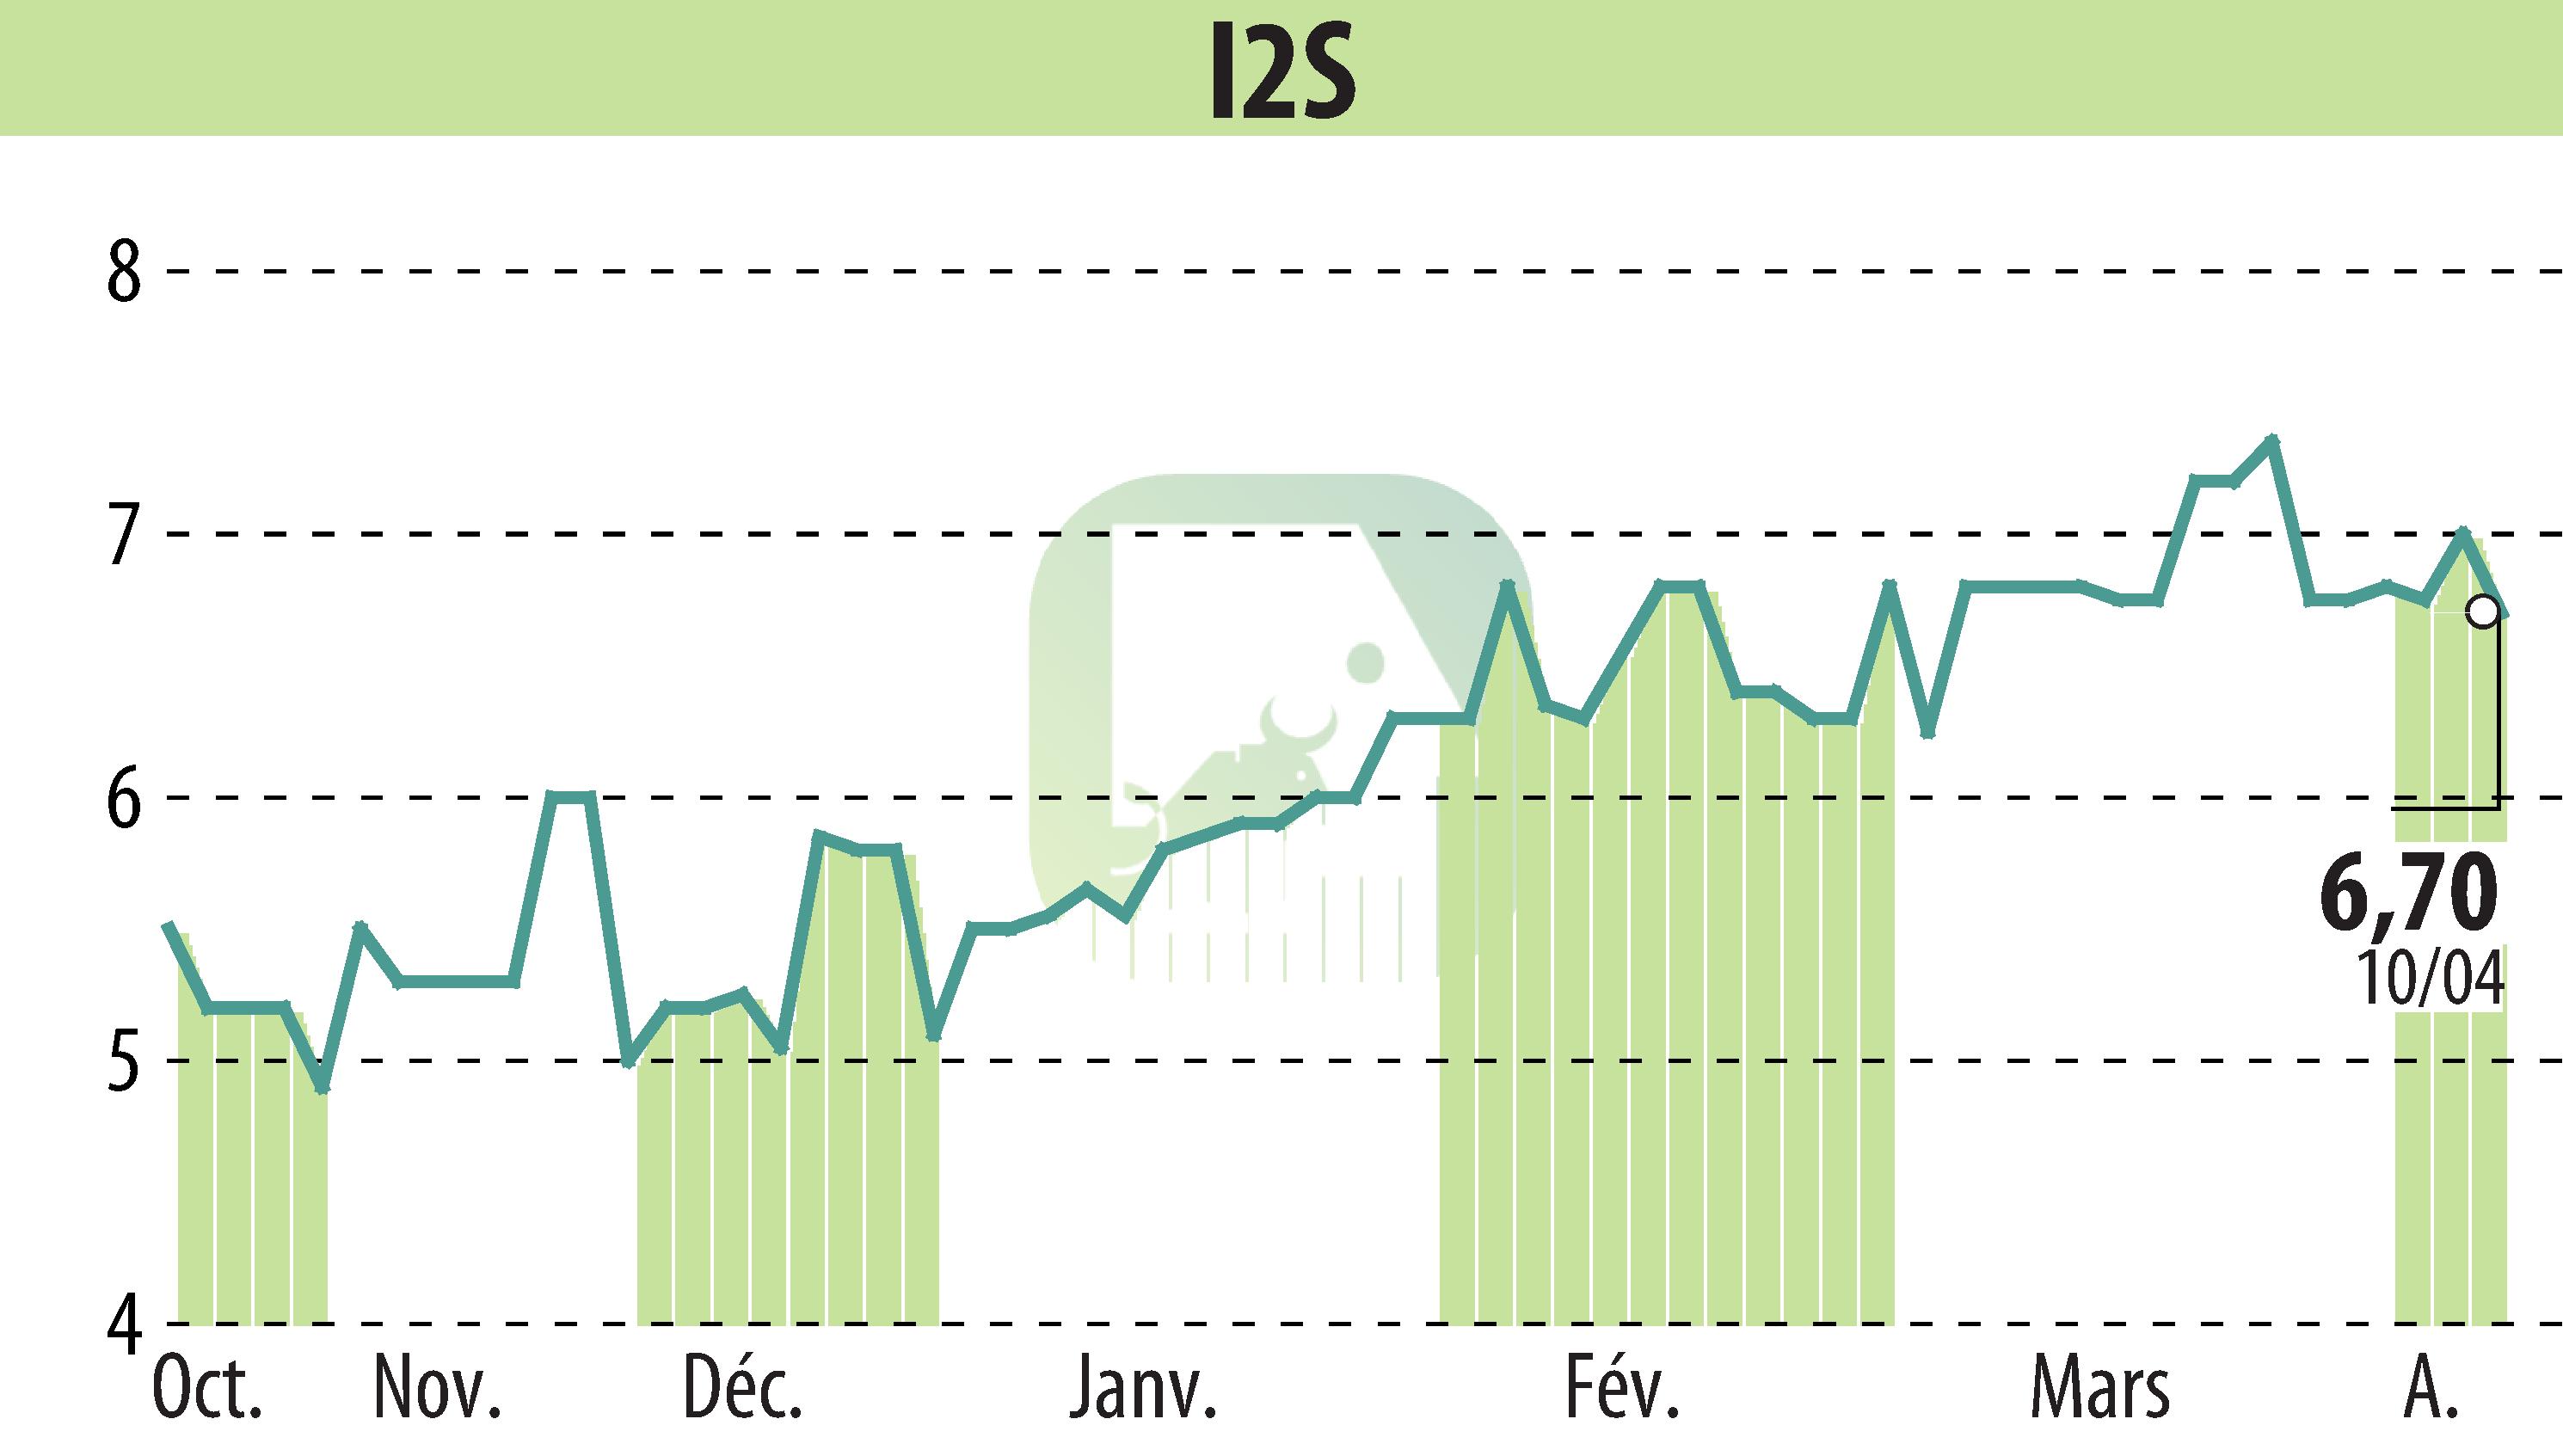 Stock price chart of I2S (EPA:ALI2S) showing fluctuations.